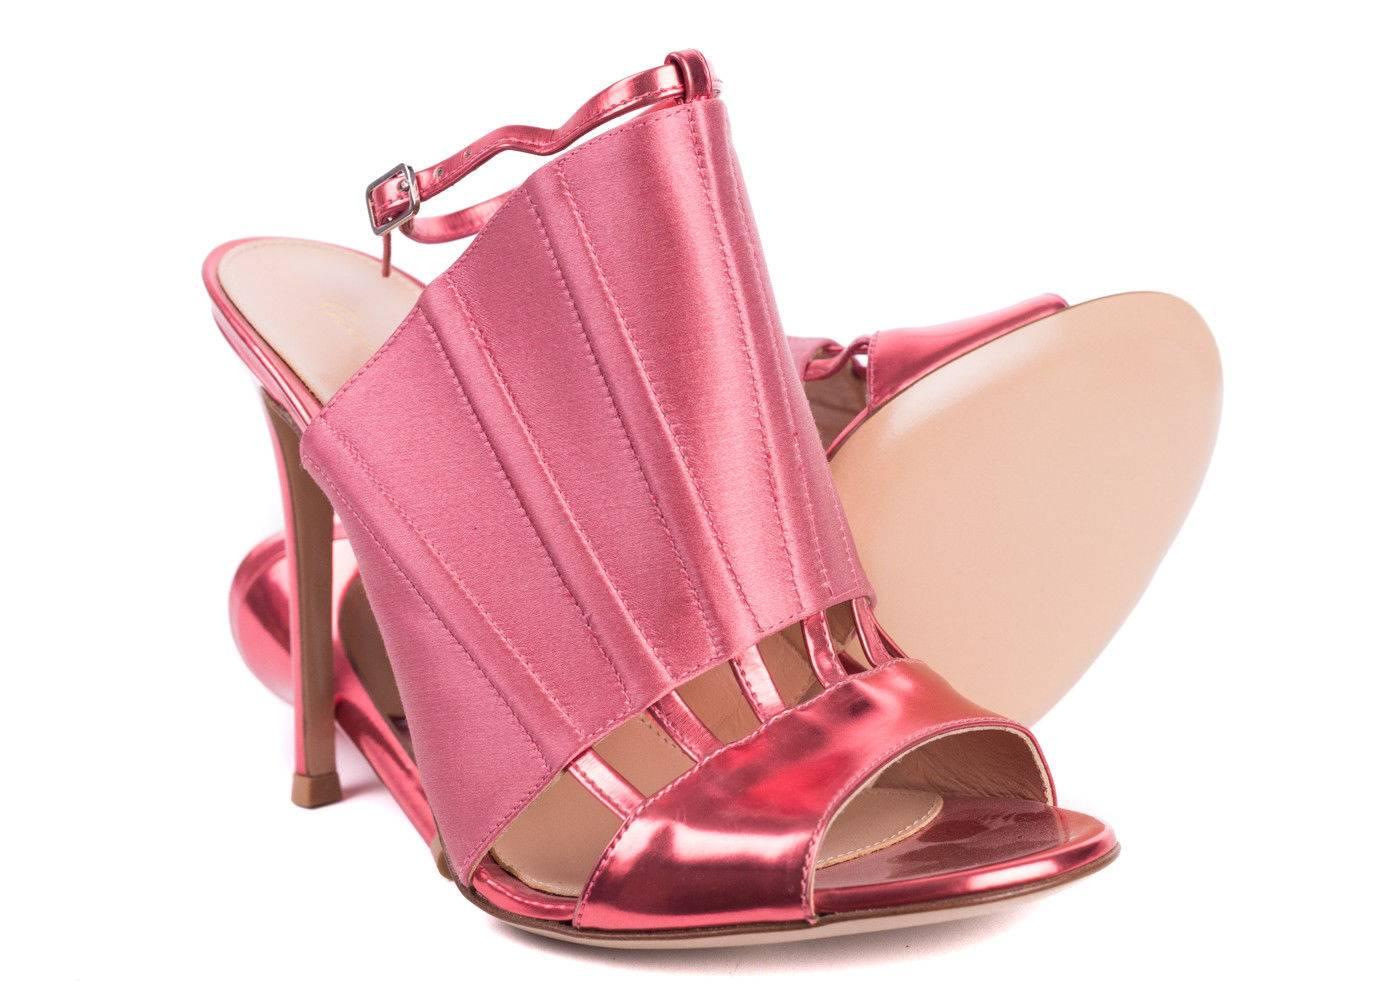 Men's Gianvito Rossi Pink Corset Caged Metallic Leather Sandal Heels For Sale